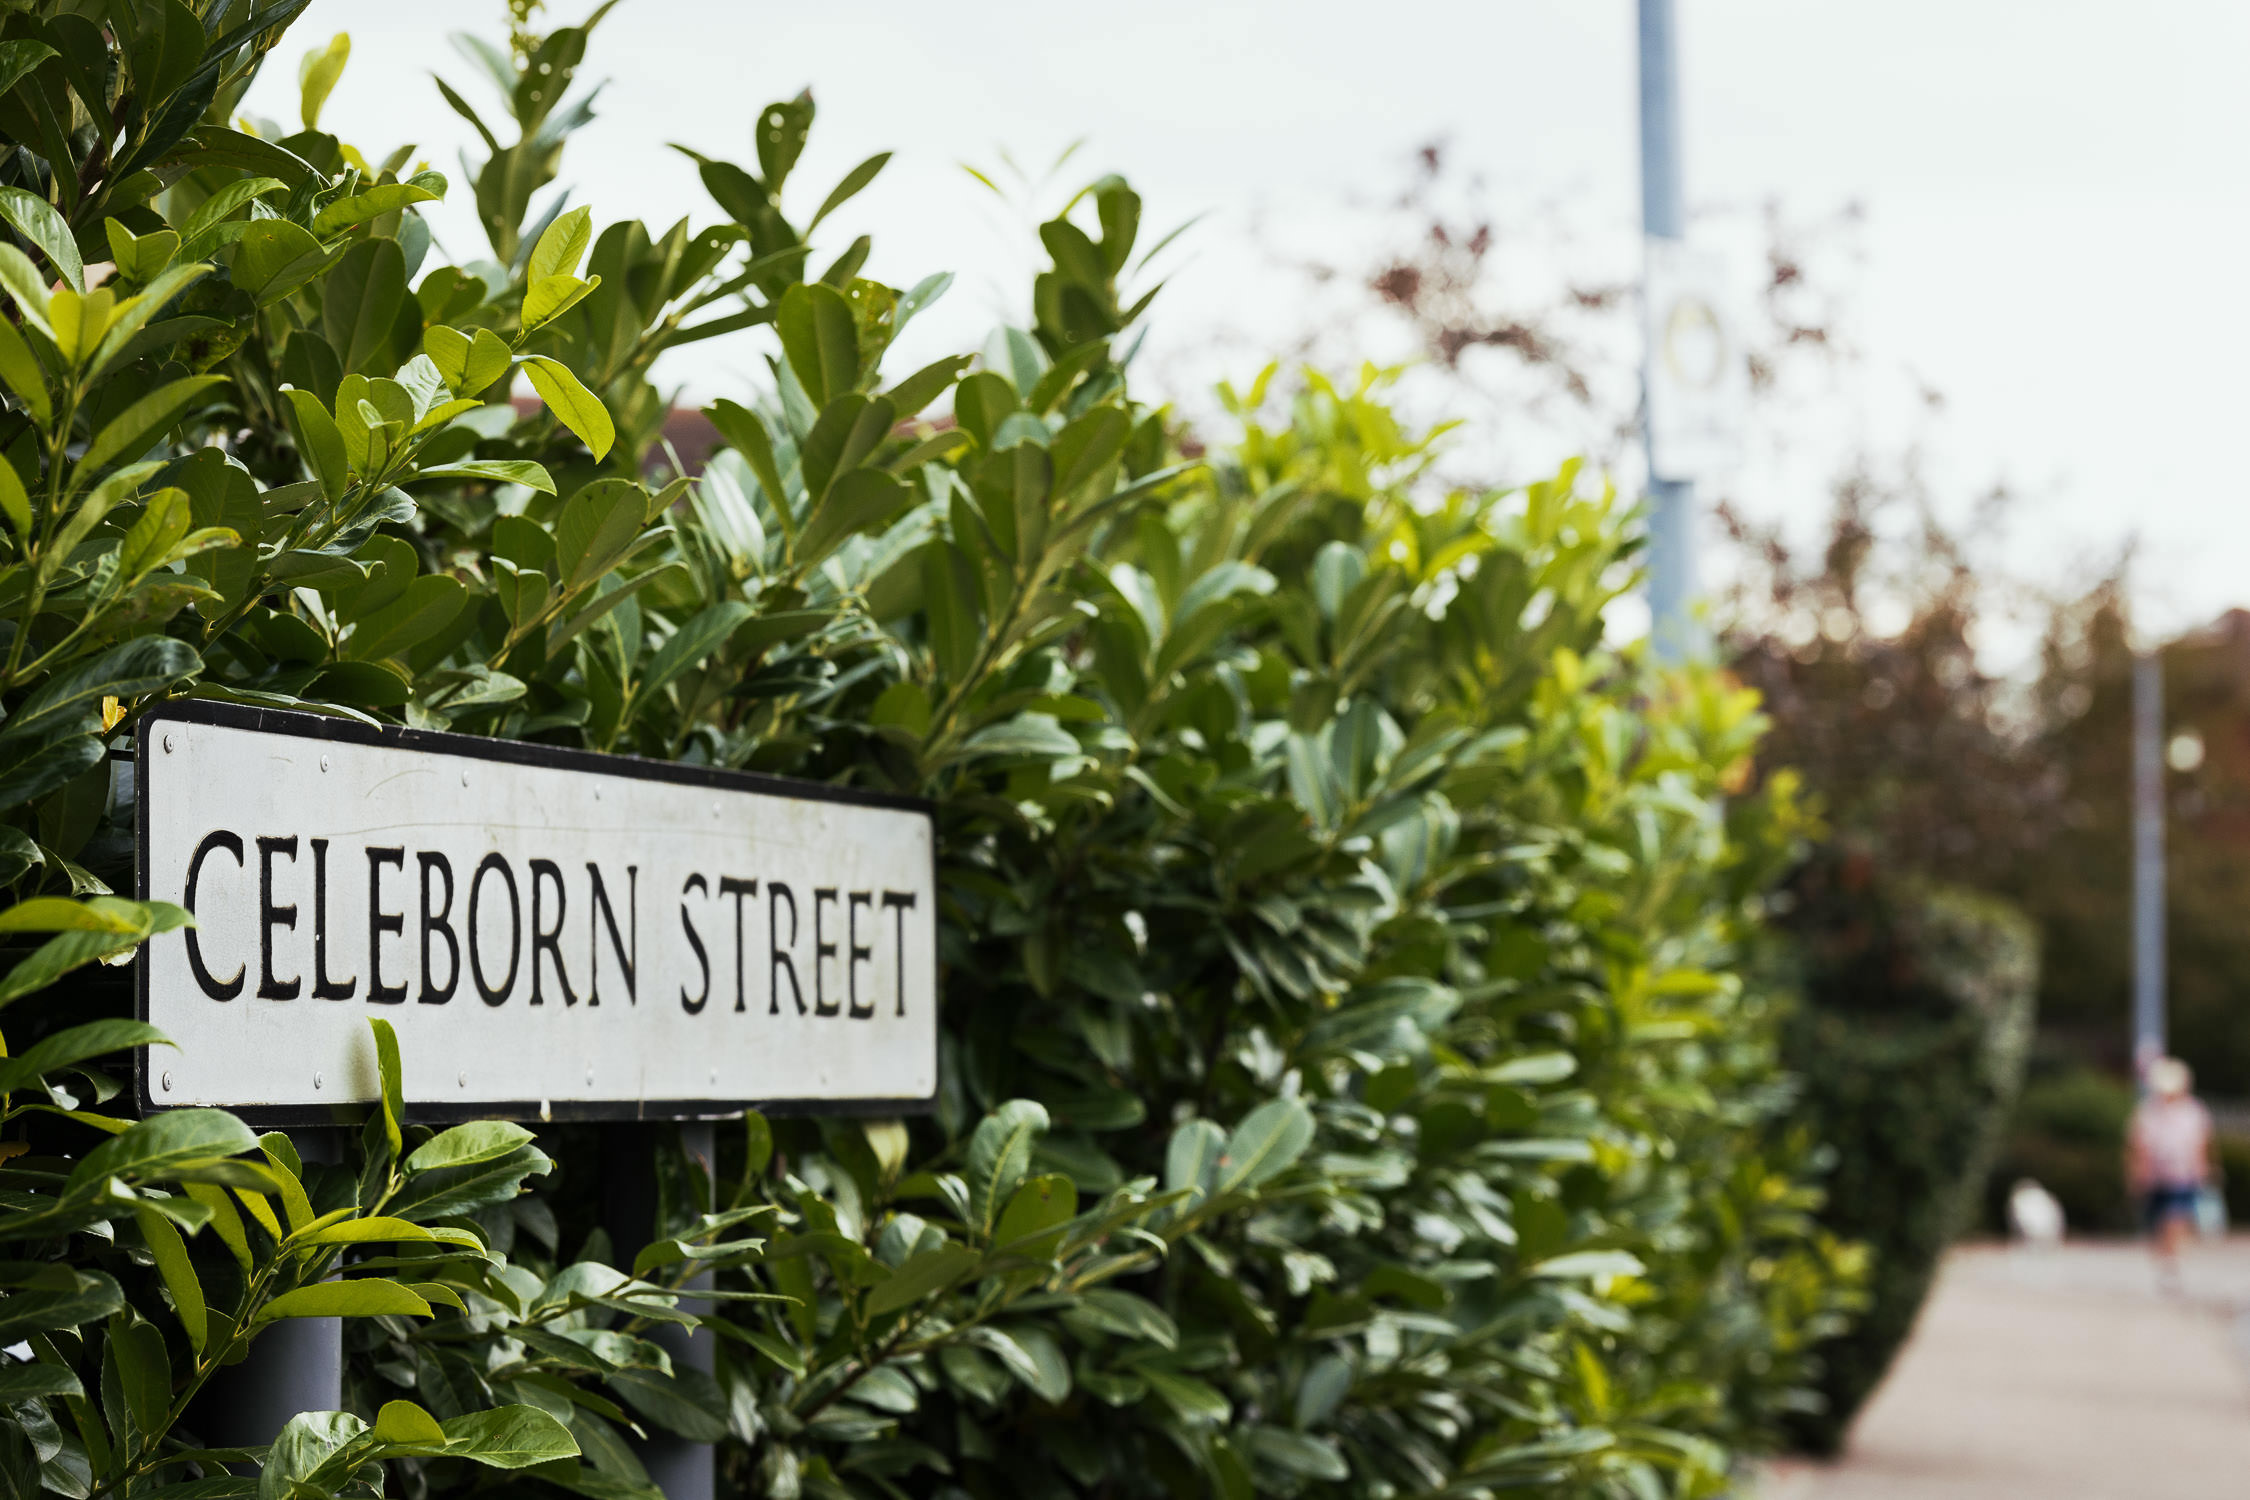 Celeborn Street road sign Tolkien in South Woodham Ferrers in Essex. The sign is in a green bush.